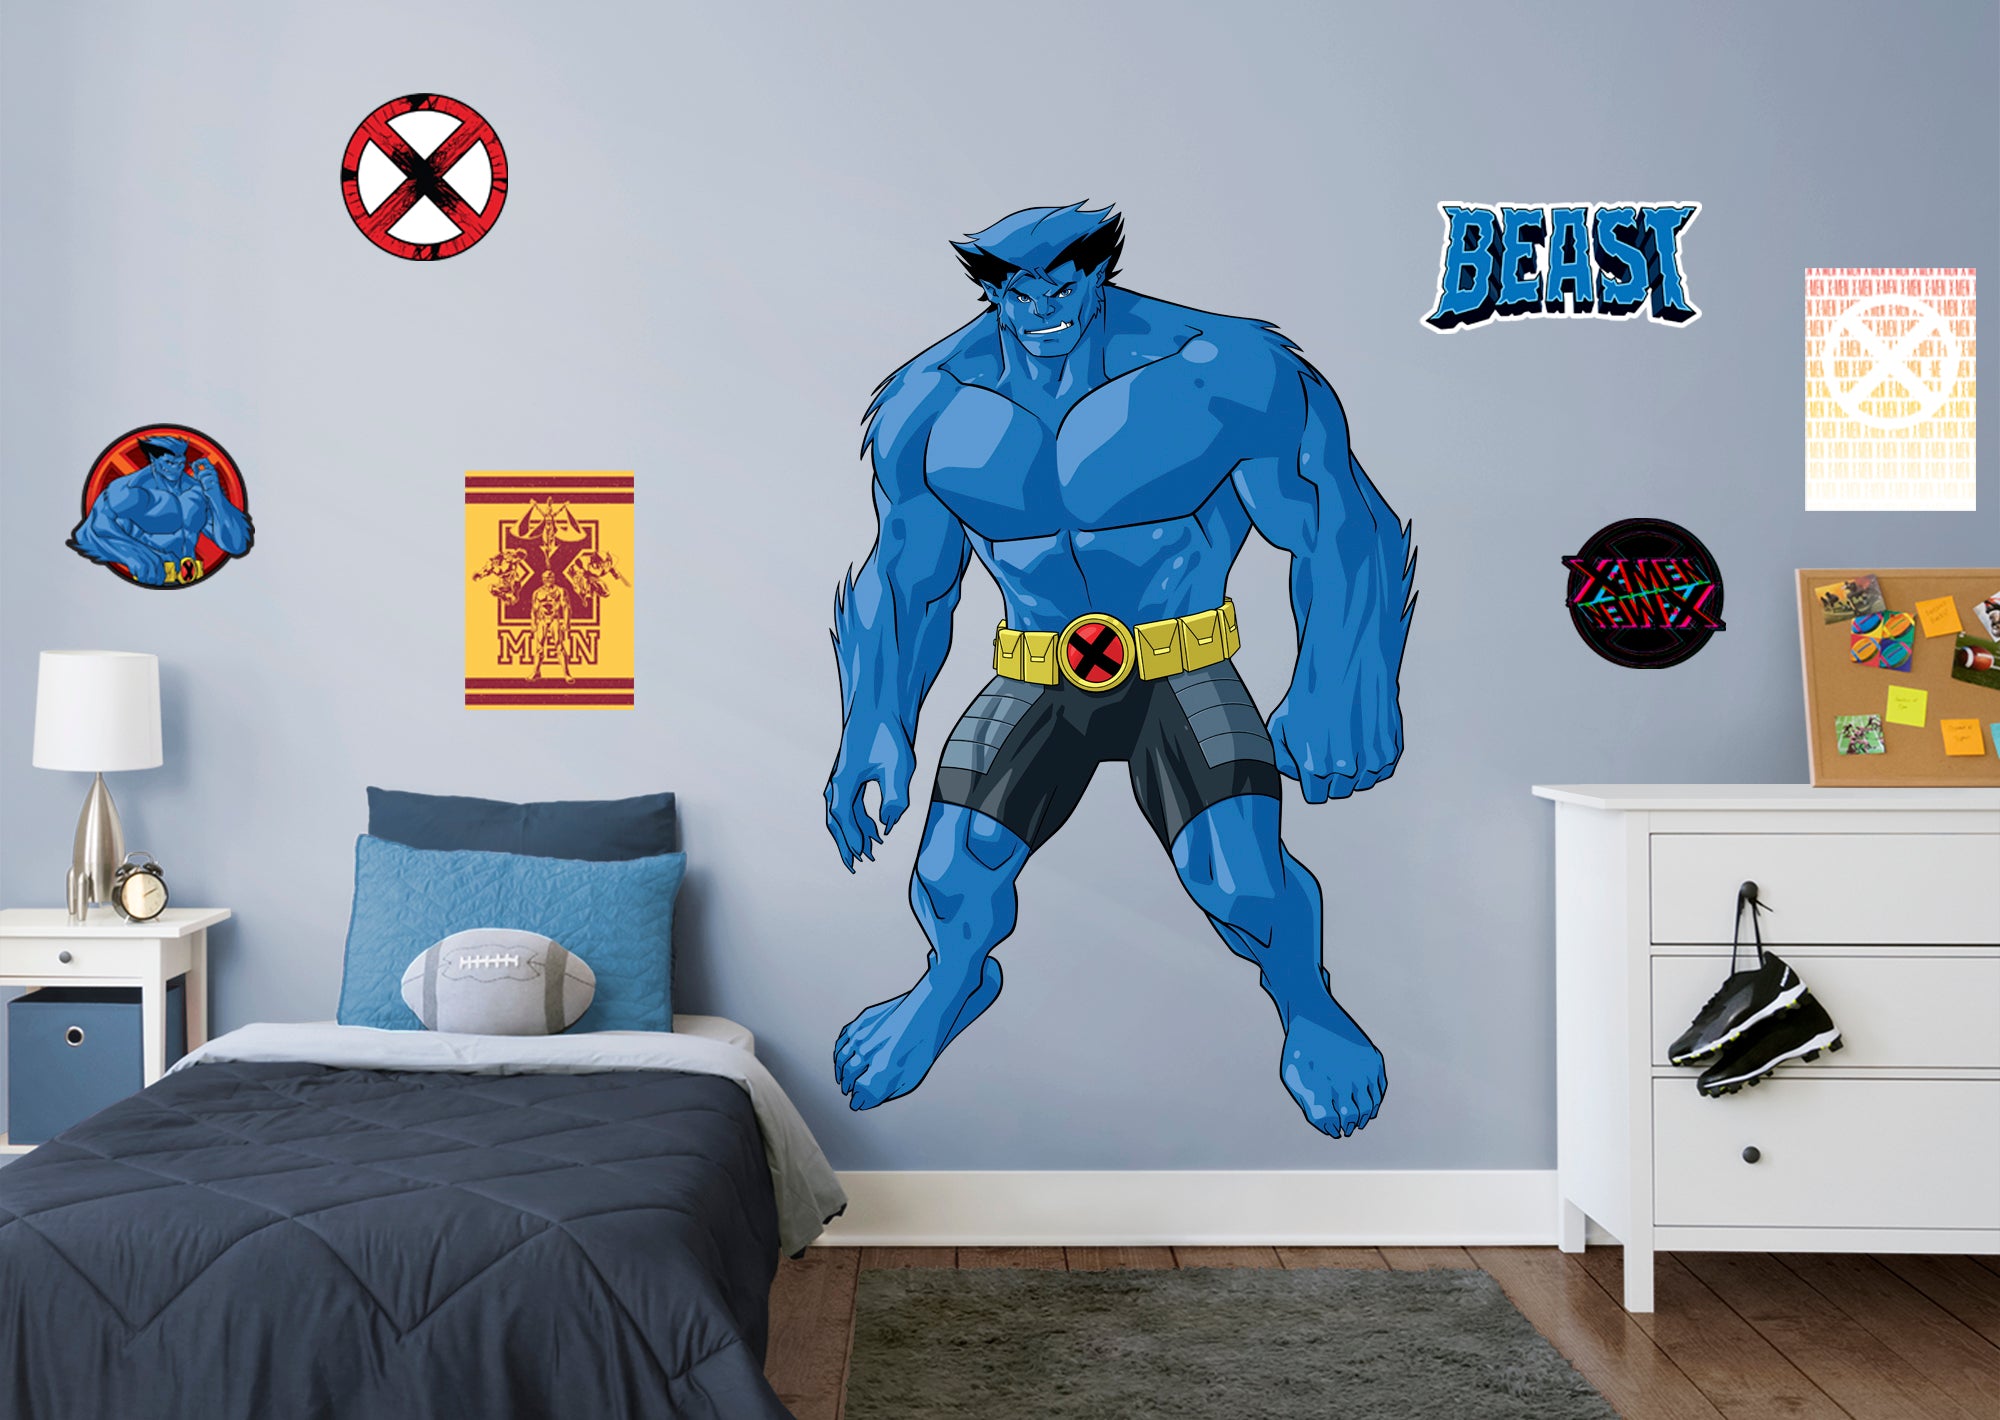 X-Men Beast RealBig - Officially Licensed Marvel Removable Wall Decal Life-Size Character + 6 Decals (49"W x 77"H) by Fathead |